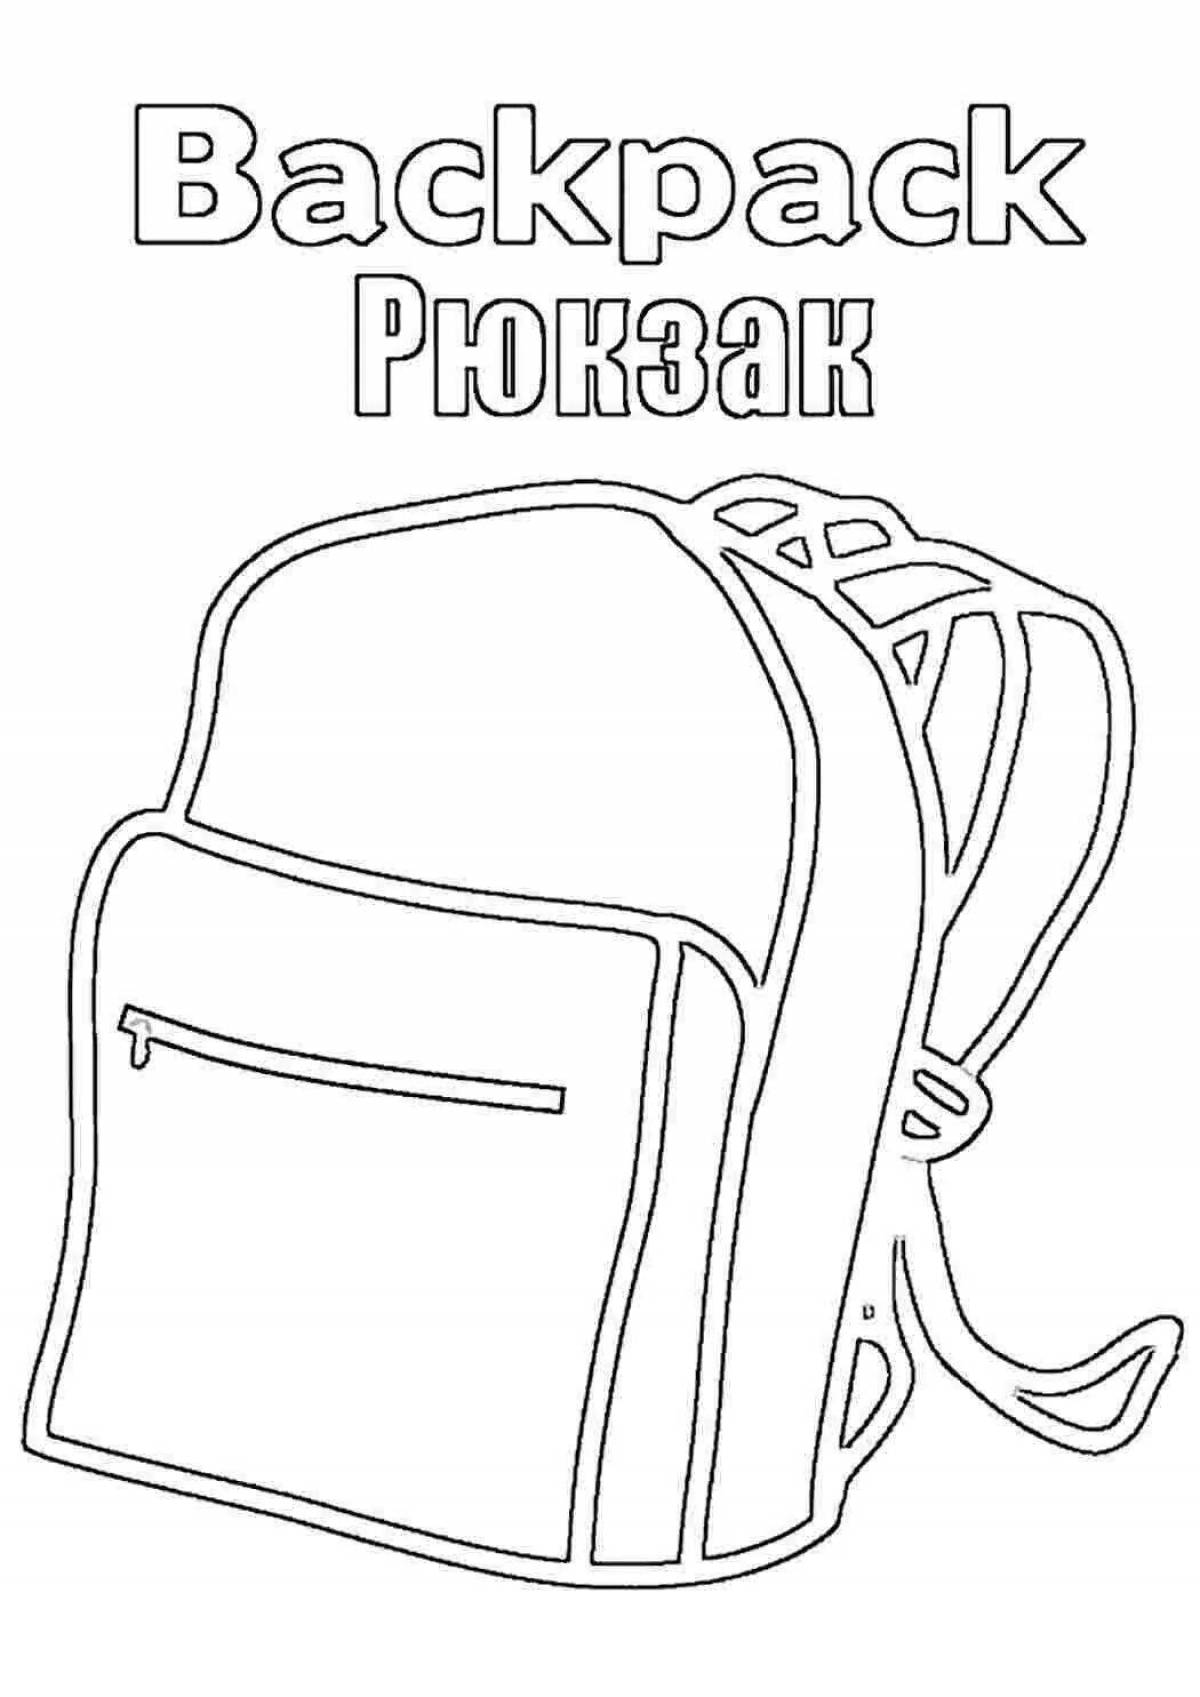 Coloring page stylish backpack